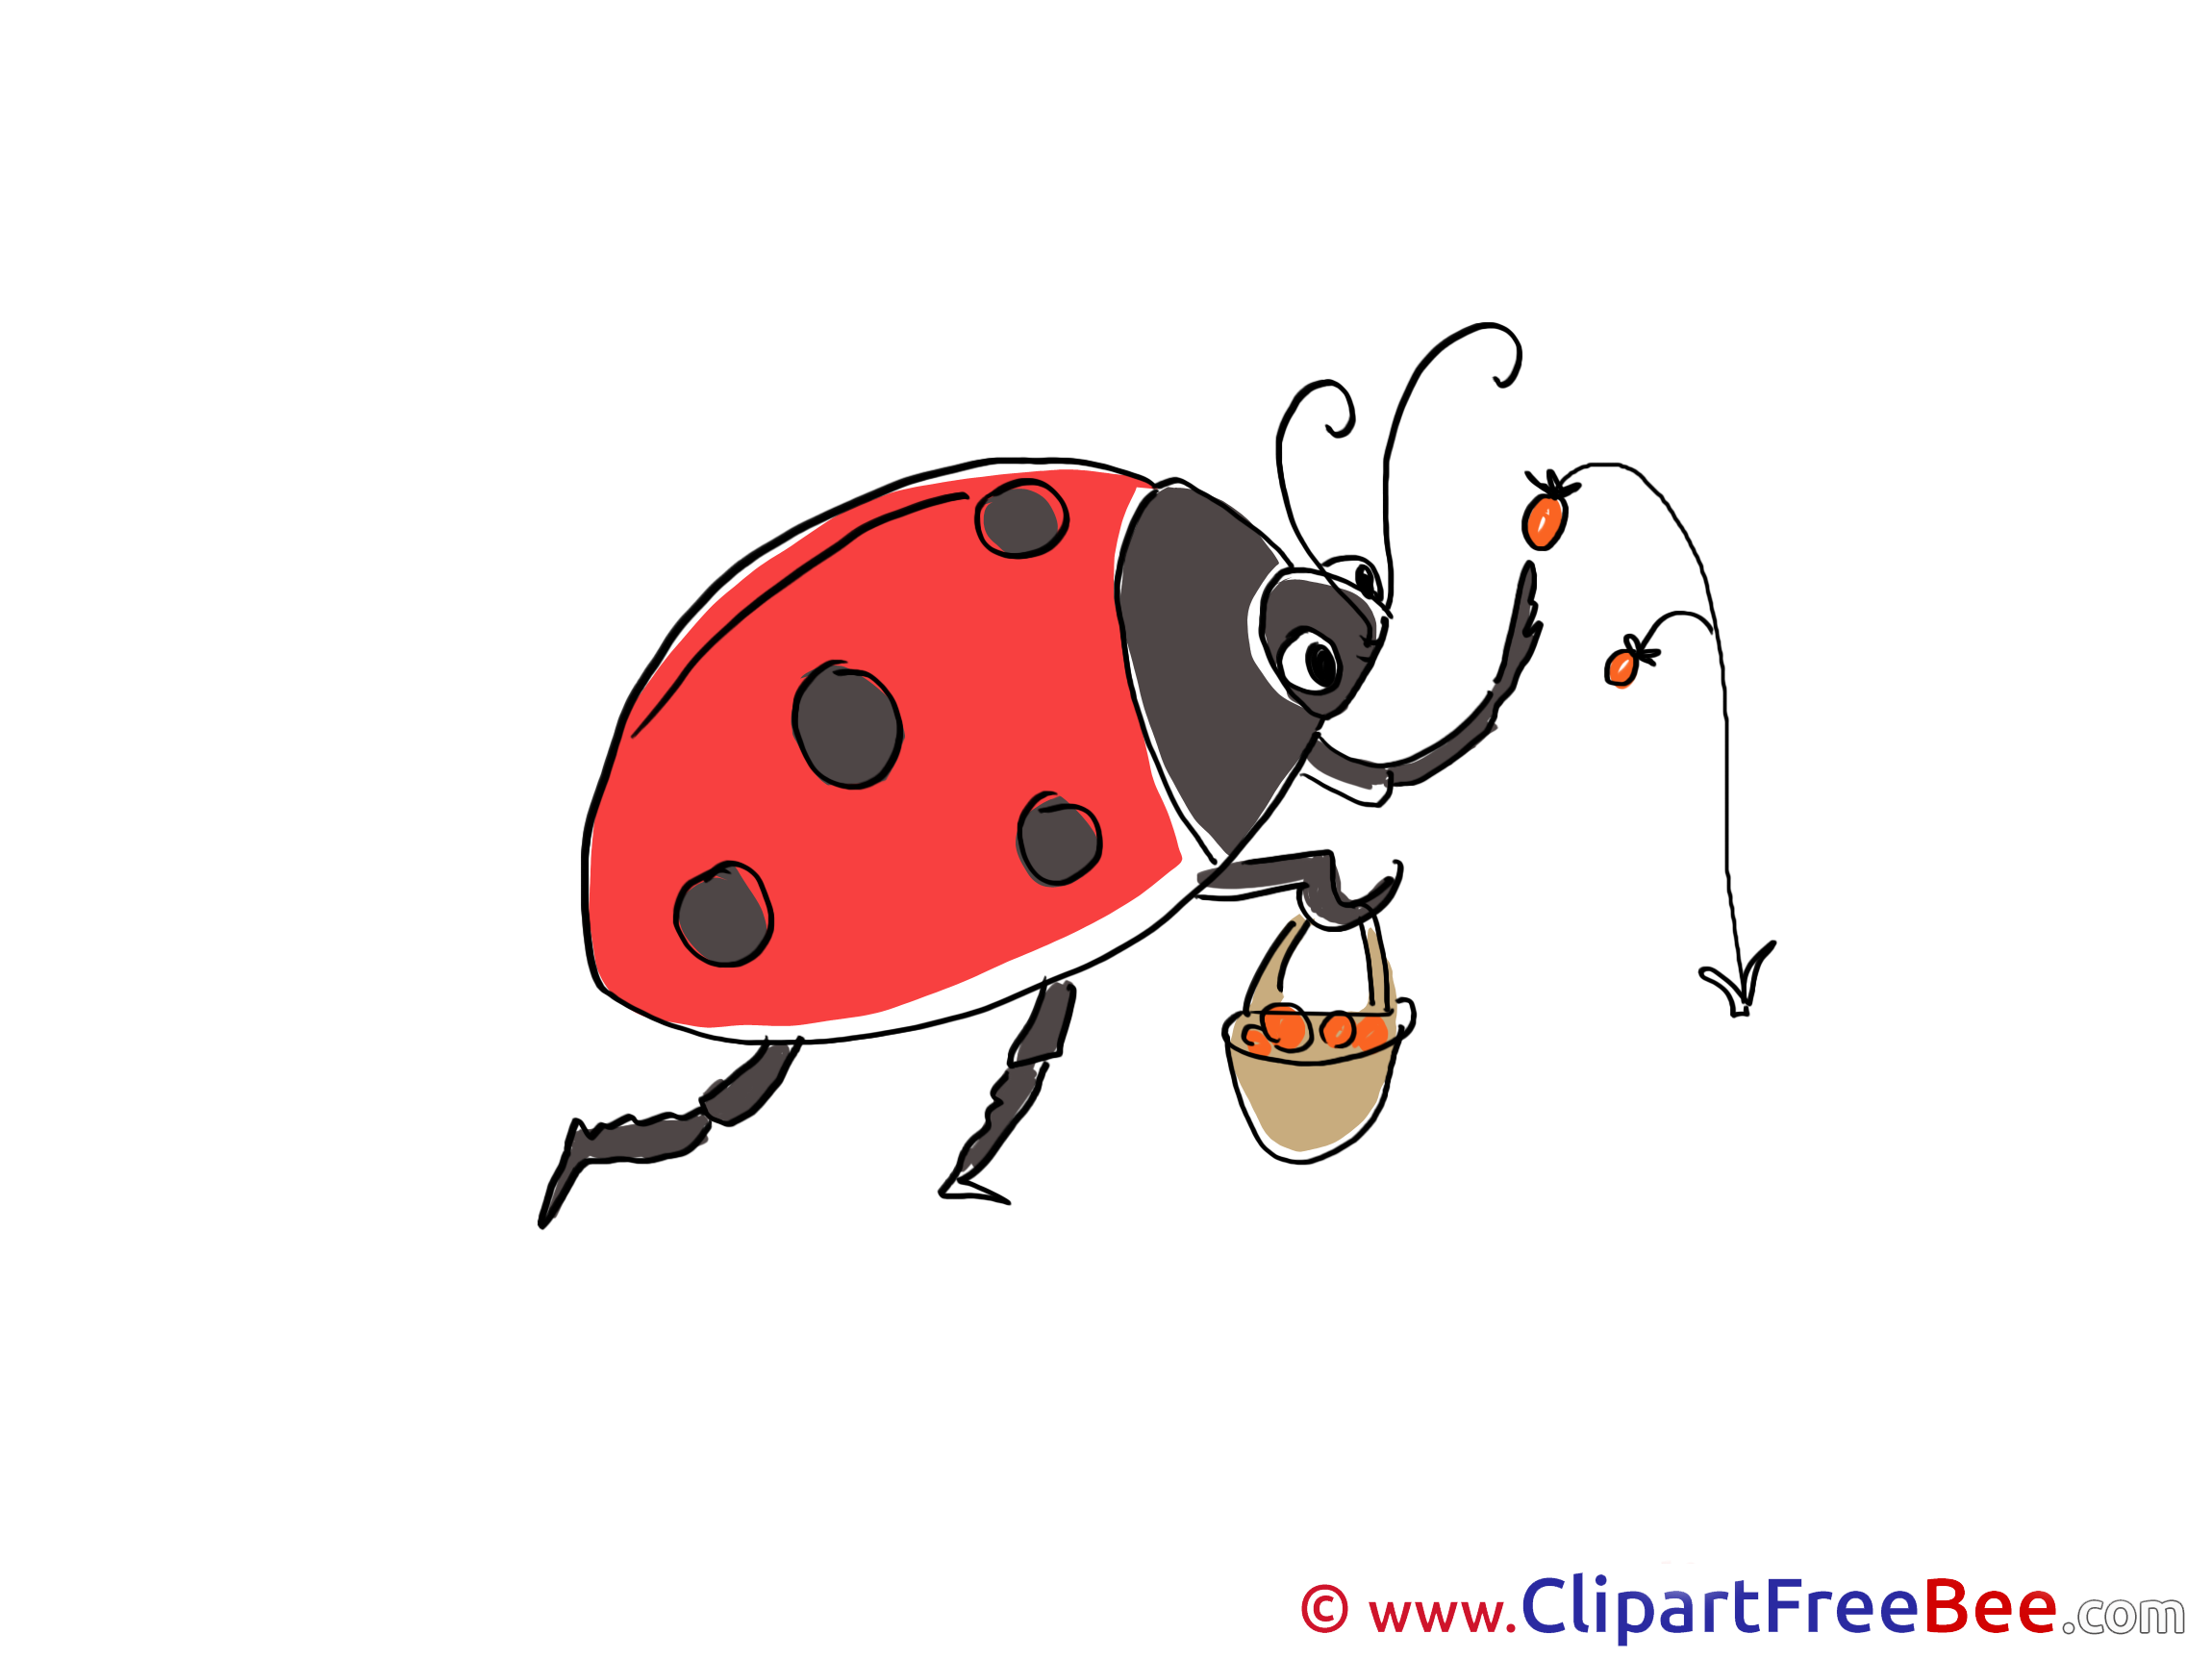 Berries Ladybug Clipart free Image download